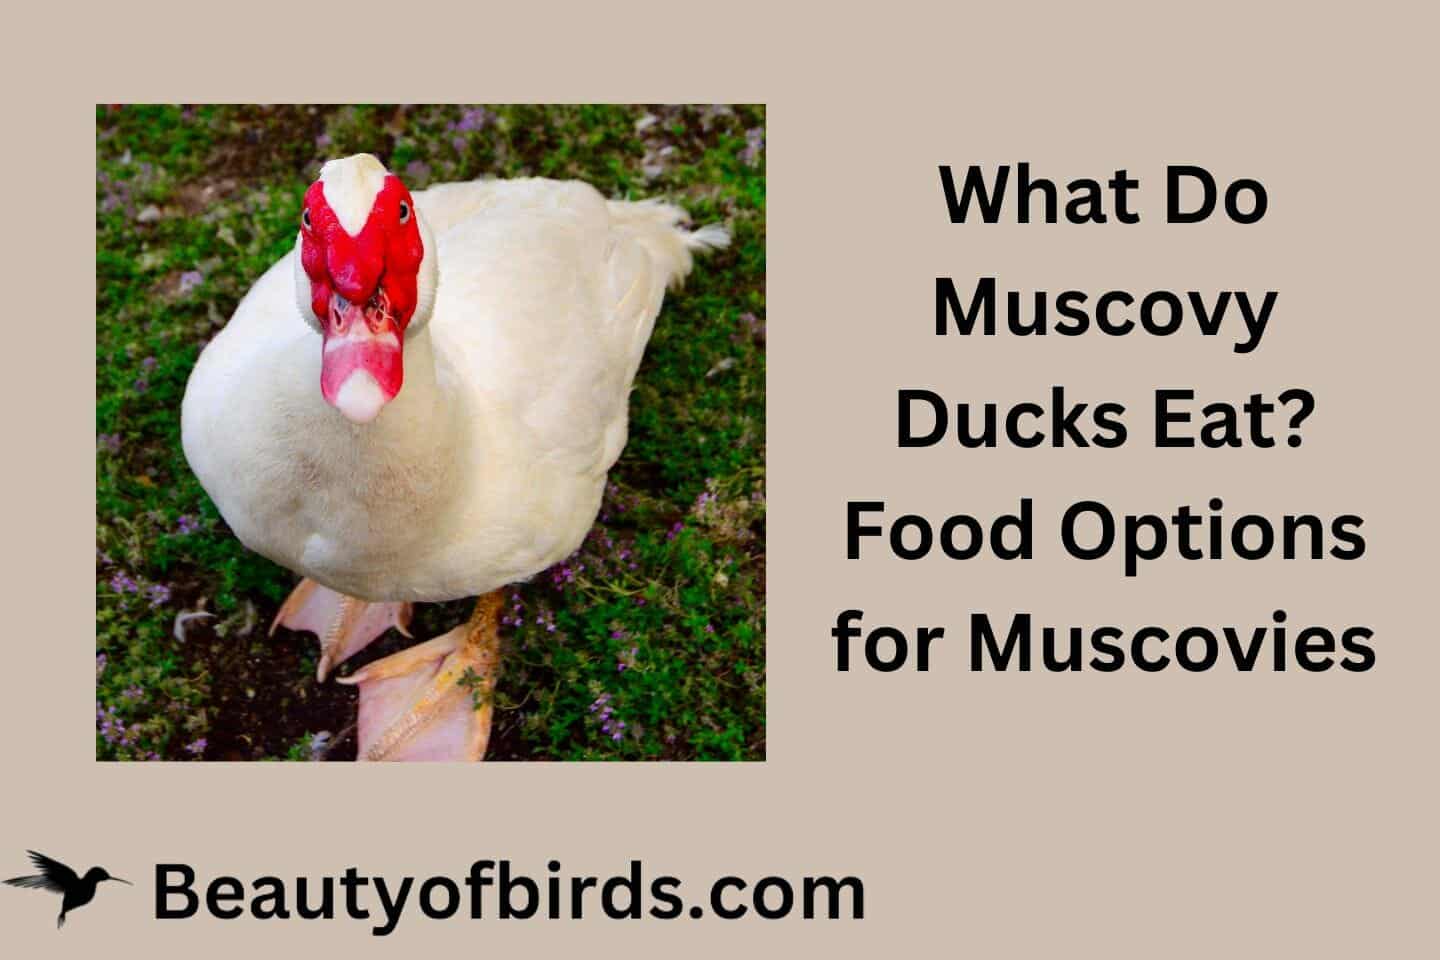 Image of a white Muscovy duck standing on grass. Text on the right side reads, "What Do Muscovy Ducks Eat? Food Options for Muscovies." The bottom left corner displays "Beautyofbirds.com" with a bird silhouette logo.